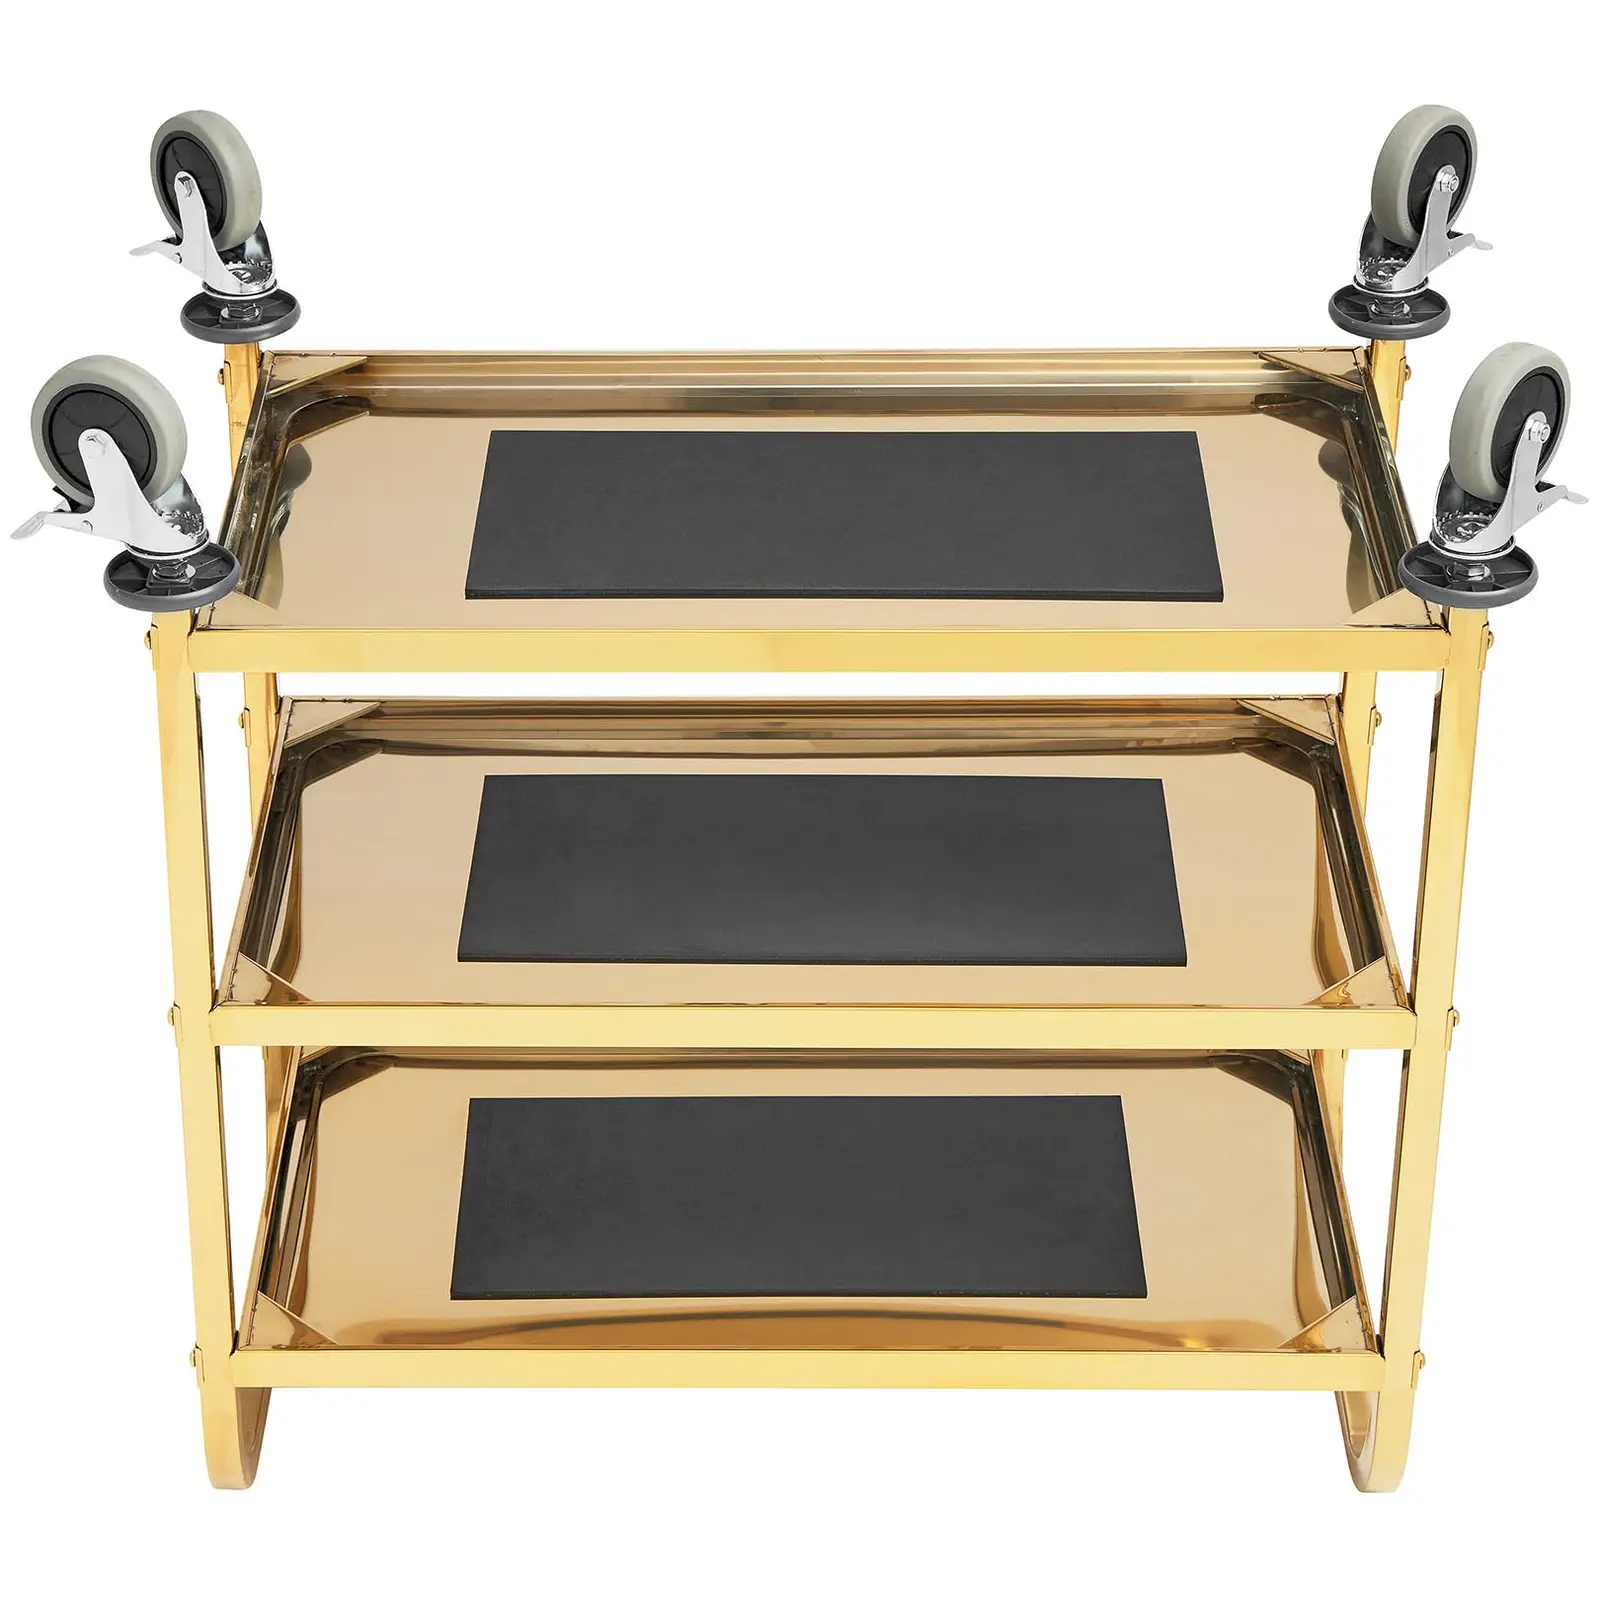 Service Trolley - 3 shelves - Royal Catering - up to 240 kg - shelves: 79.5 x 44.5 cm